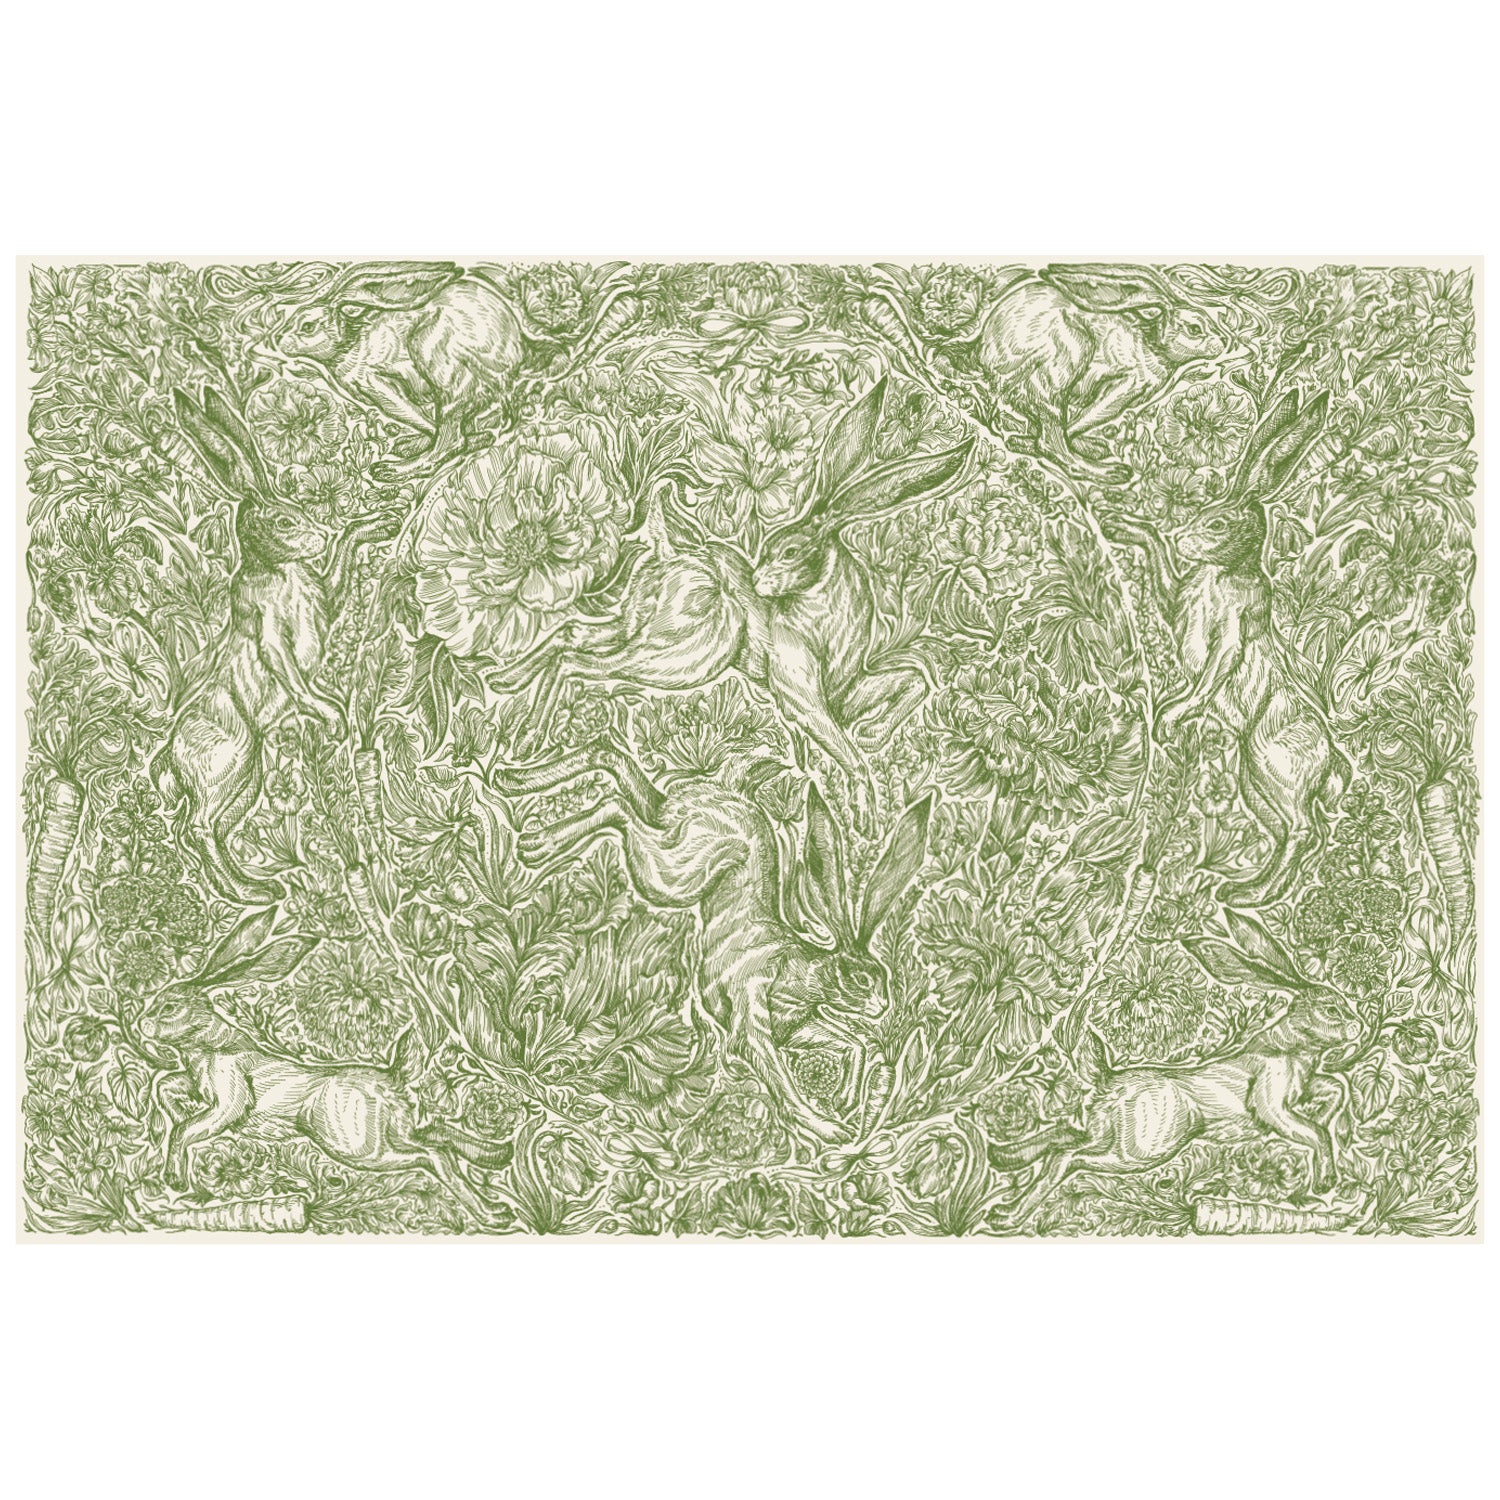 A densely-packed illustration of rabbits, flowers, carrots and foliage, in medium green over white.